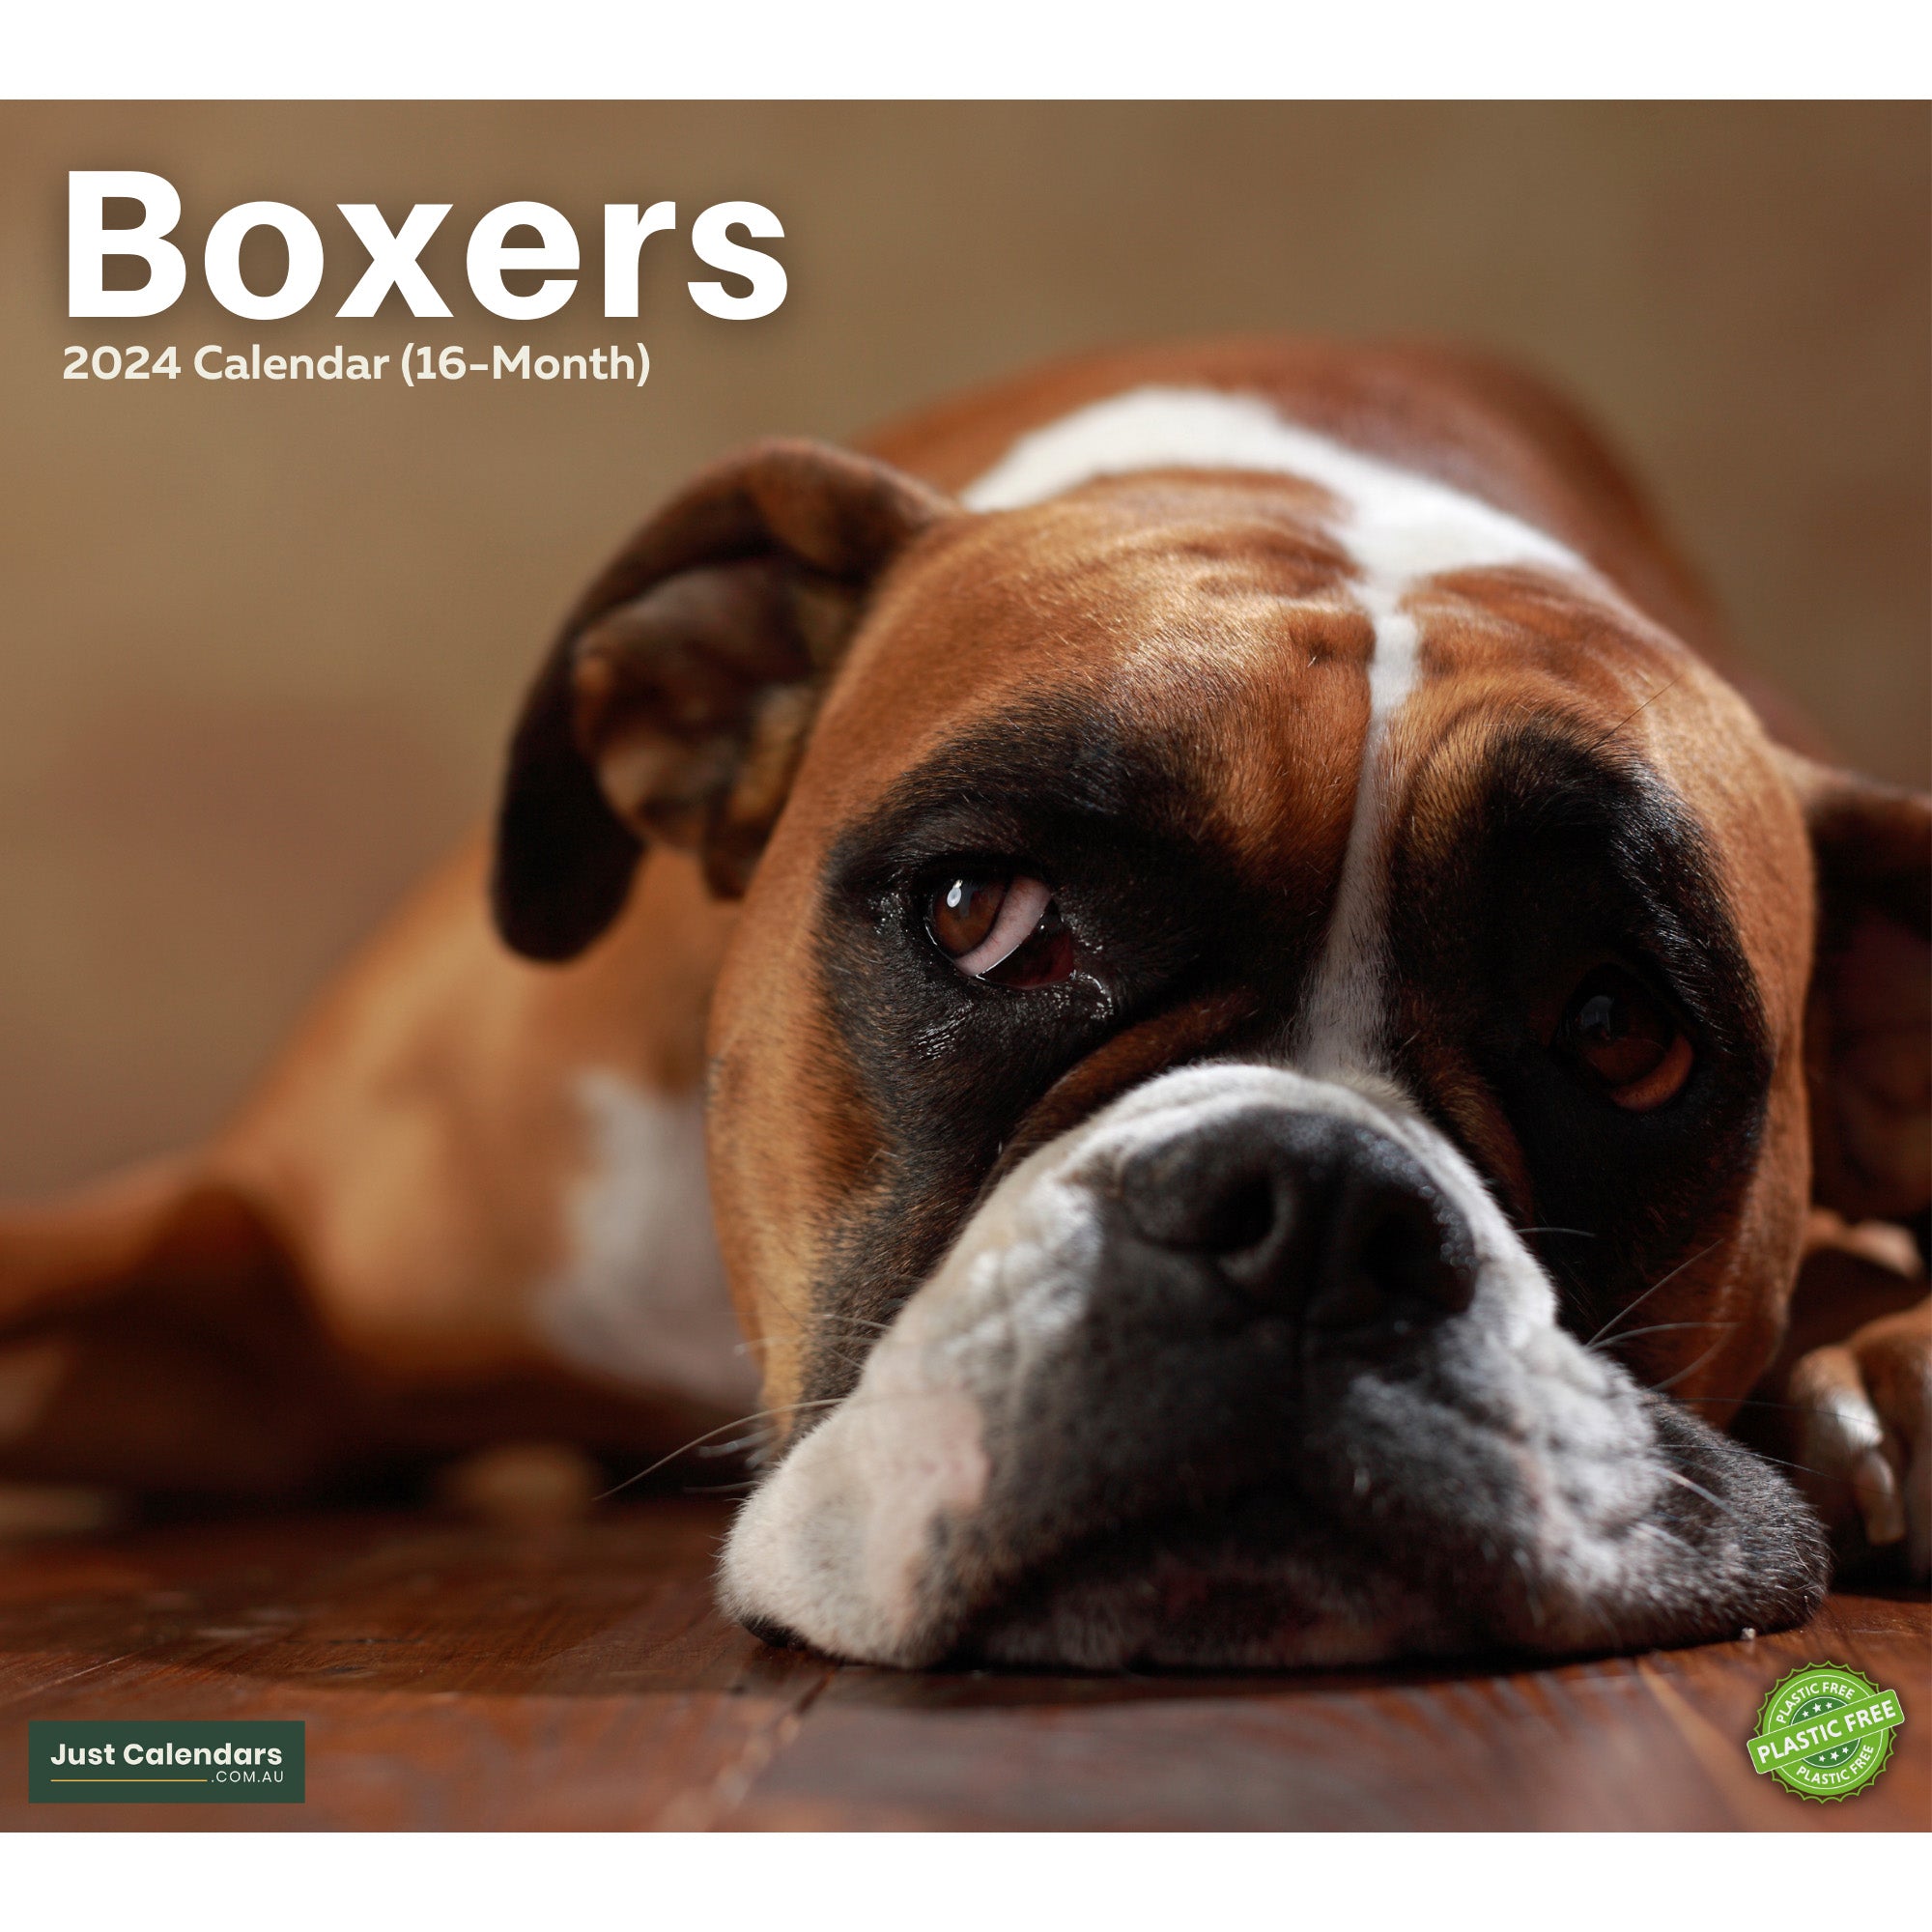 2024 Boxers - Deluxe Wall Calendar - Dogs & Puppies Calendars By Just